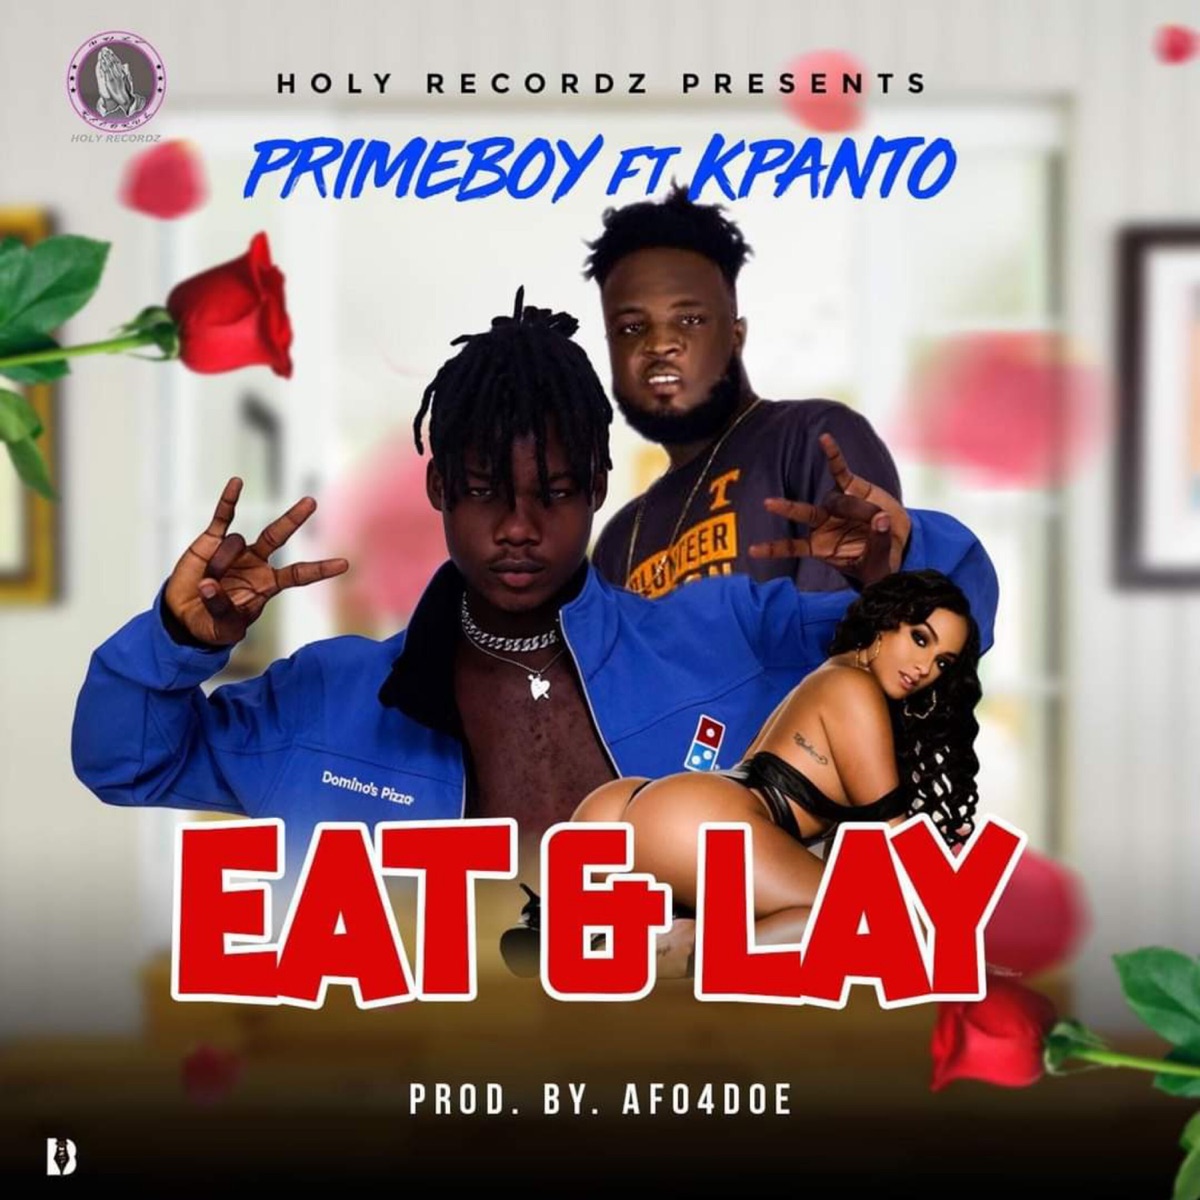 Eat and Lay (feat. Kpanto) - Single by Primeboy on Apple Music